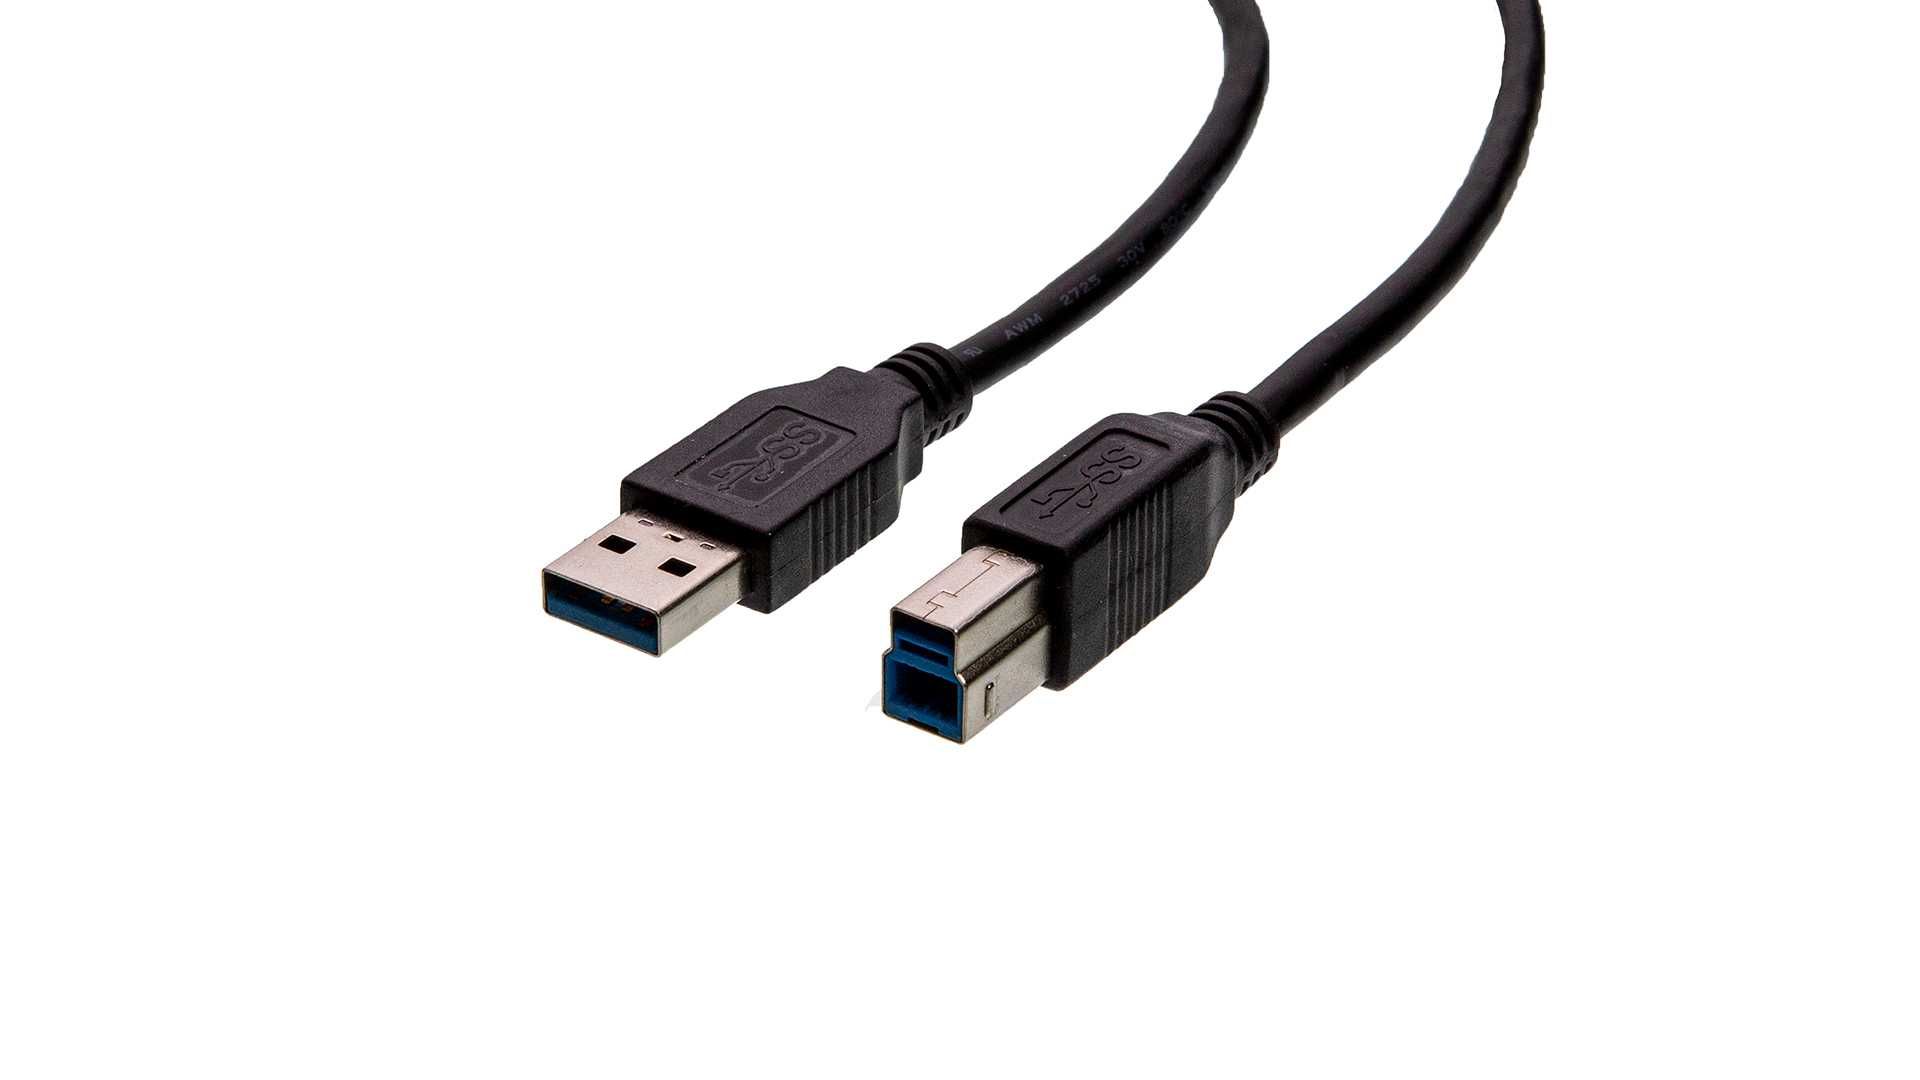 Amphenol USB 3.0 A Male to B Male Cable, Black 1.5м